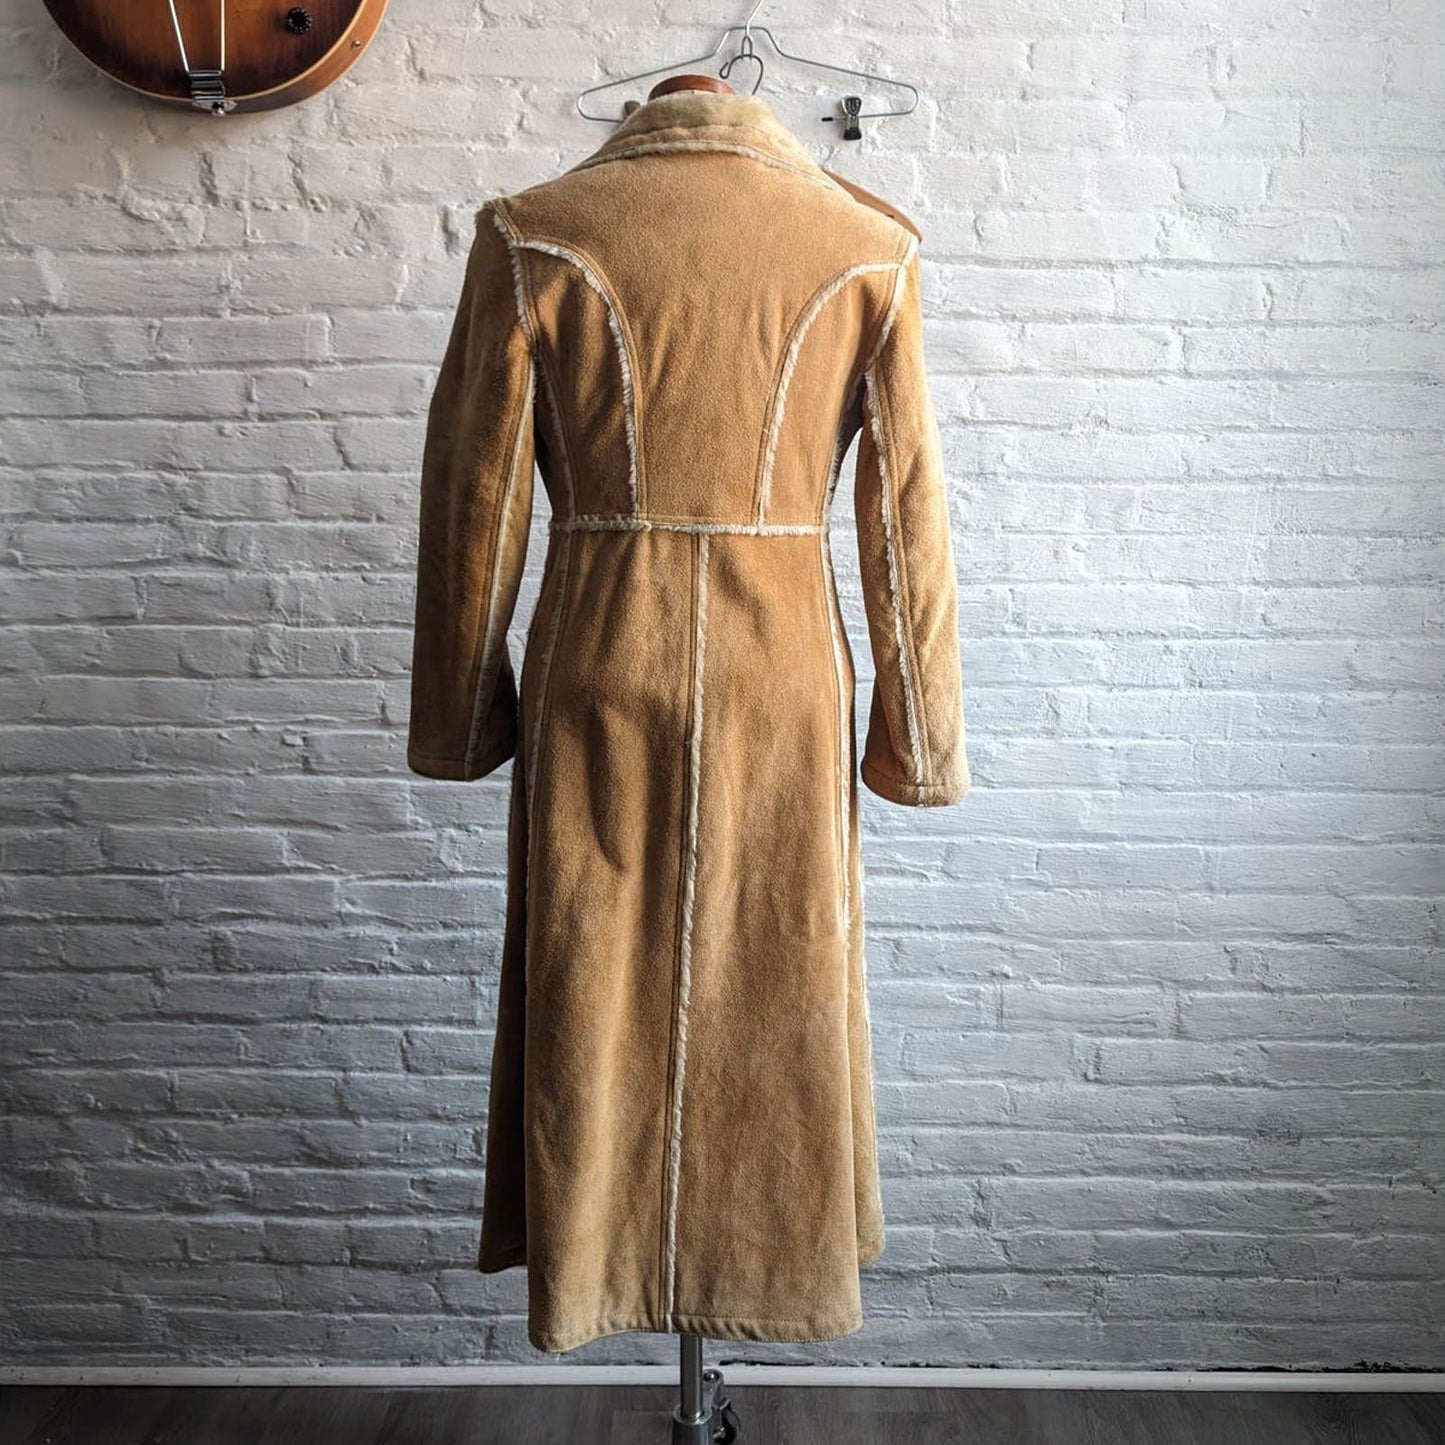 Vintage Genuine Suede Leather Penny Lane Duster Groovy Furry Trench Coat Jacket